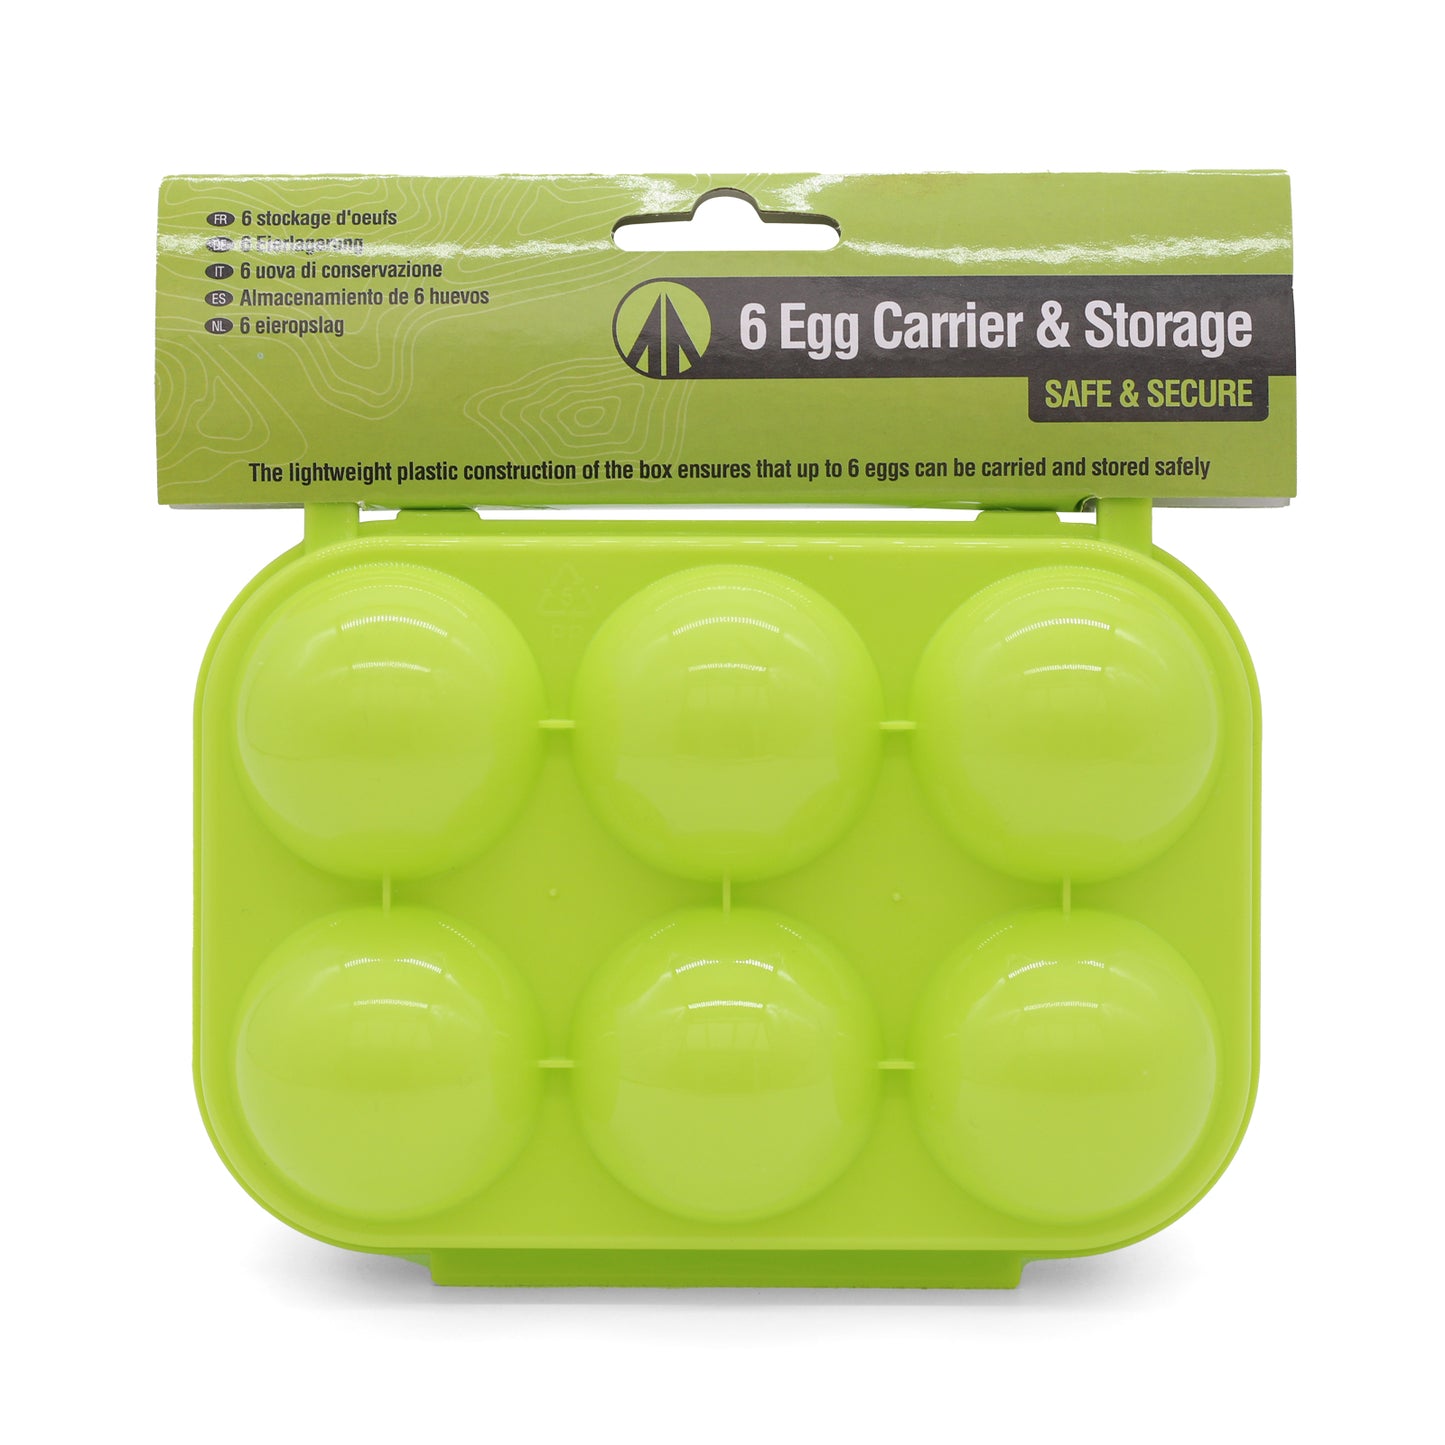 Egg Carrier Protects 6 Eggs New in Packaging